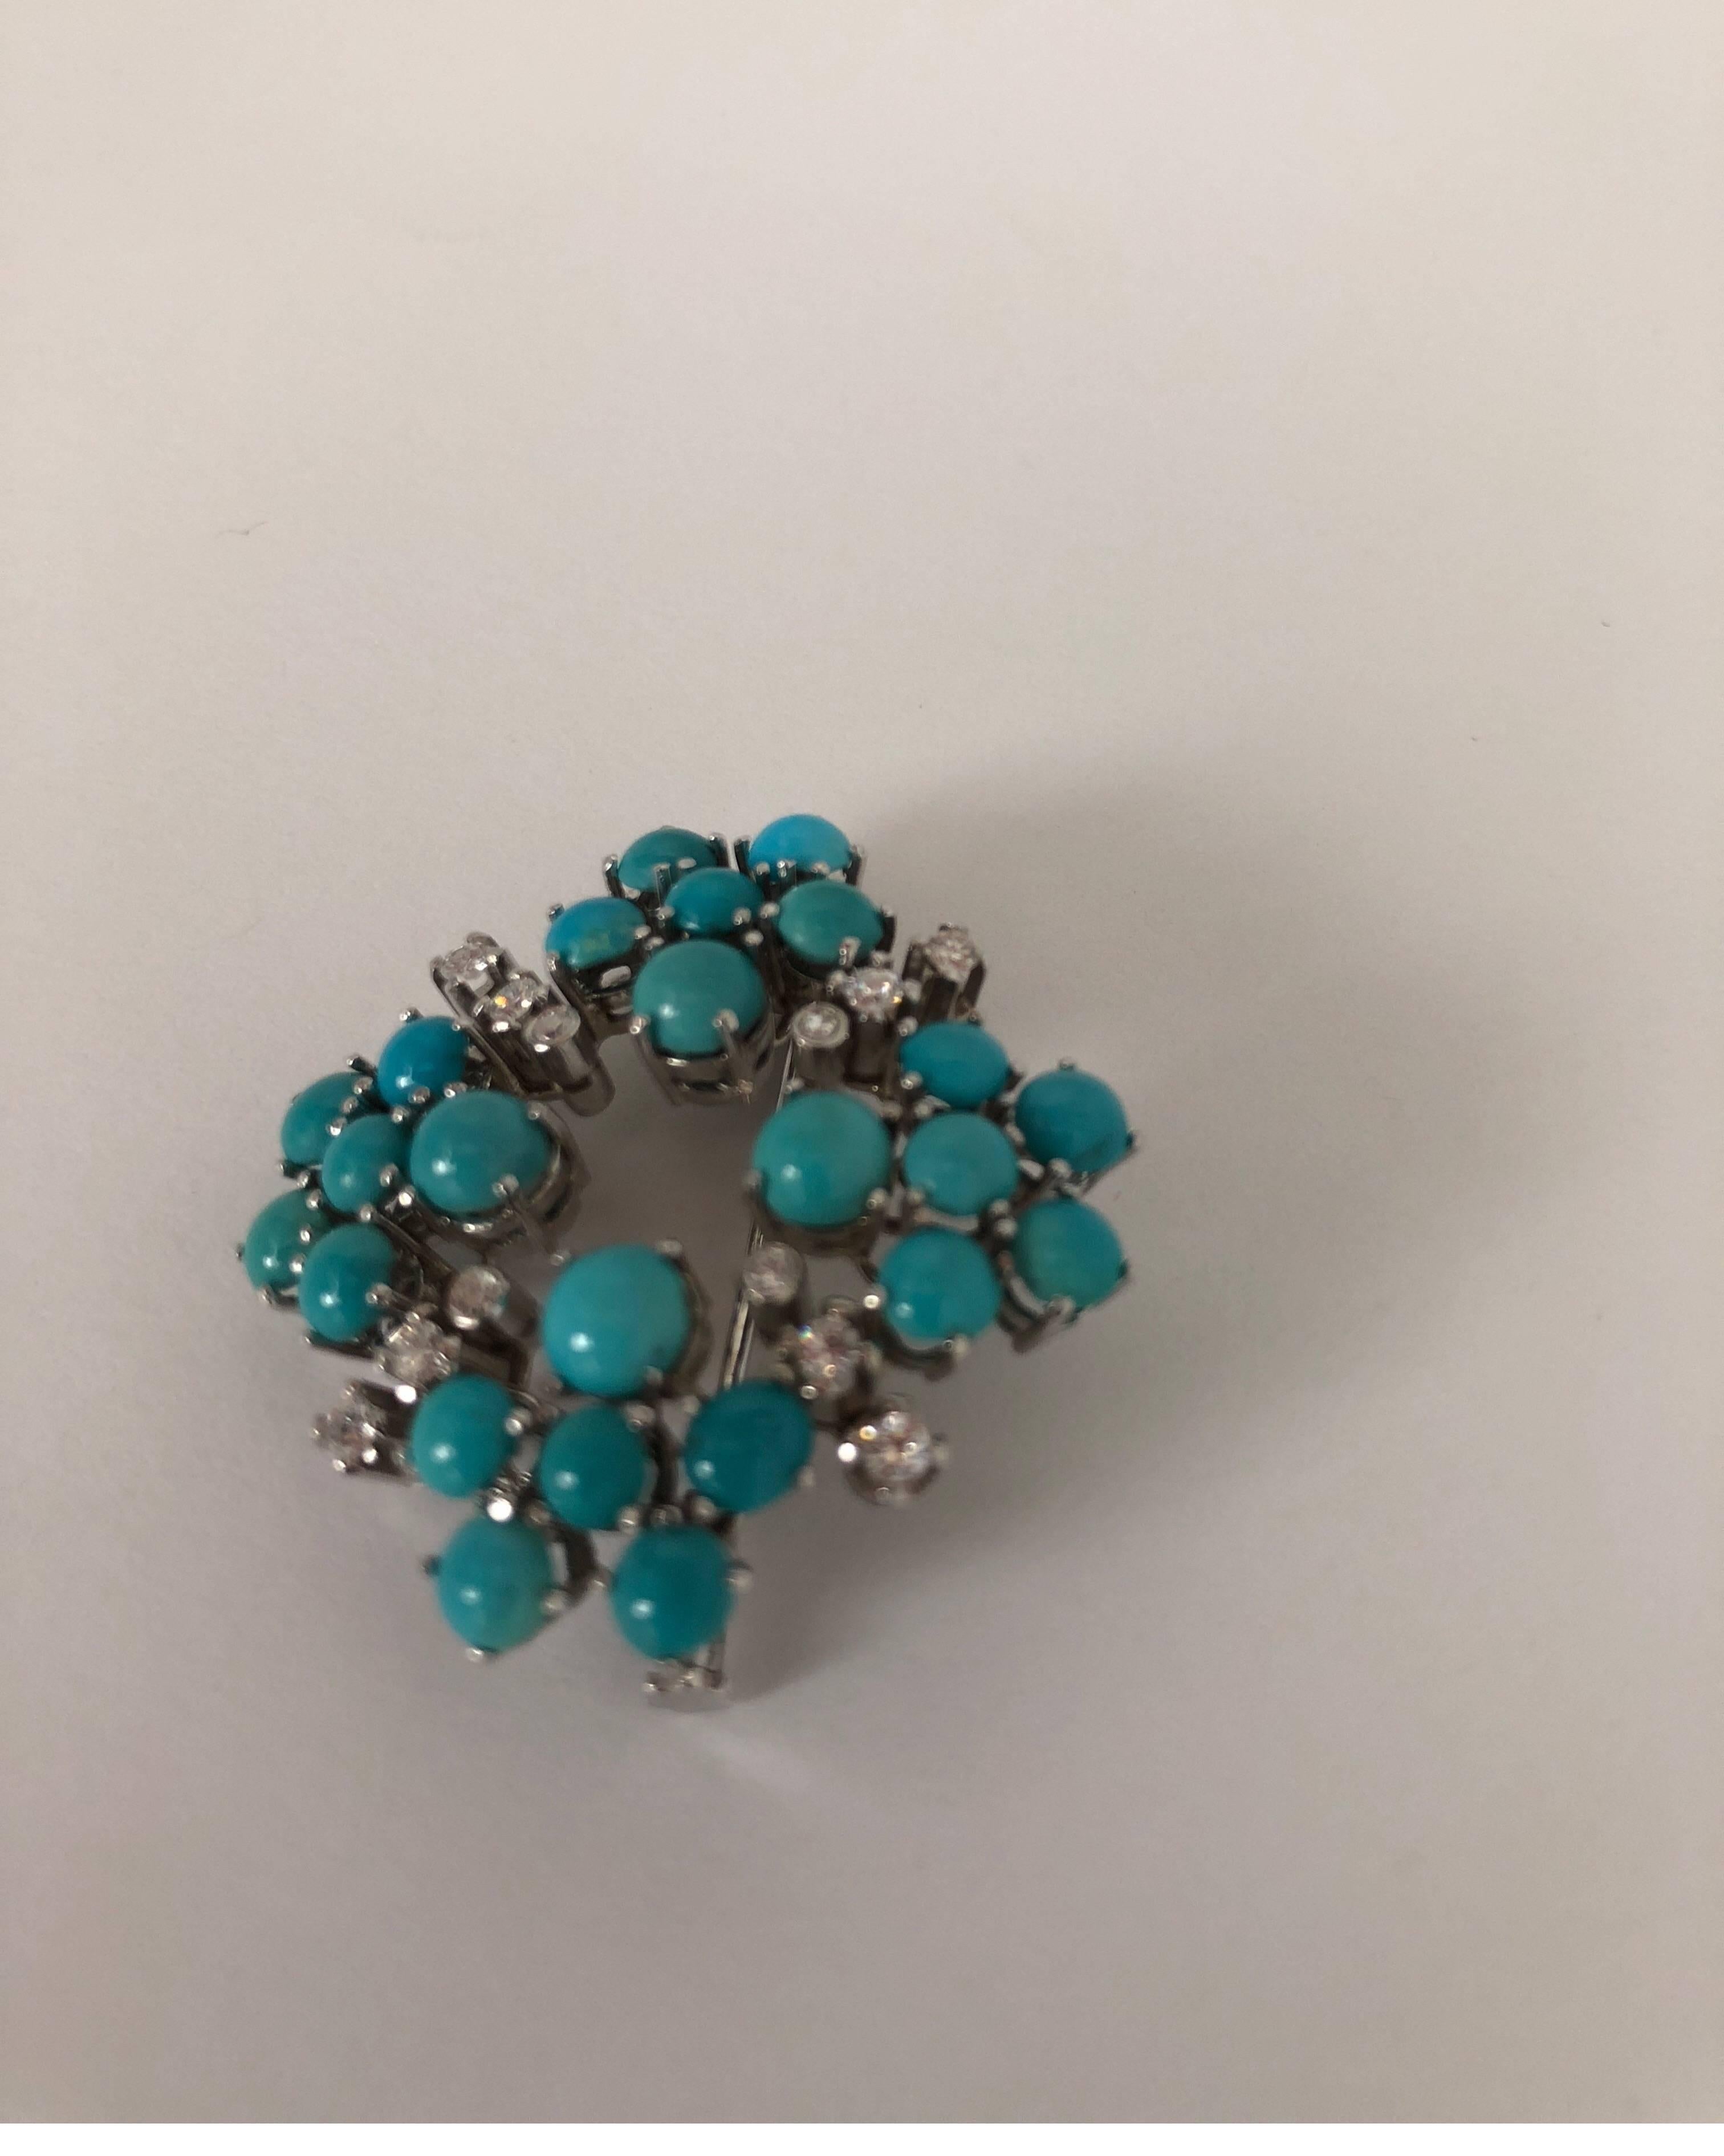 White 18kt gold brooch with white diamonds and turquoise
total weight of gold 10
total weight of turquoise gr 1.02
total weight of diamonds ct 040
STAMP 750